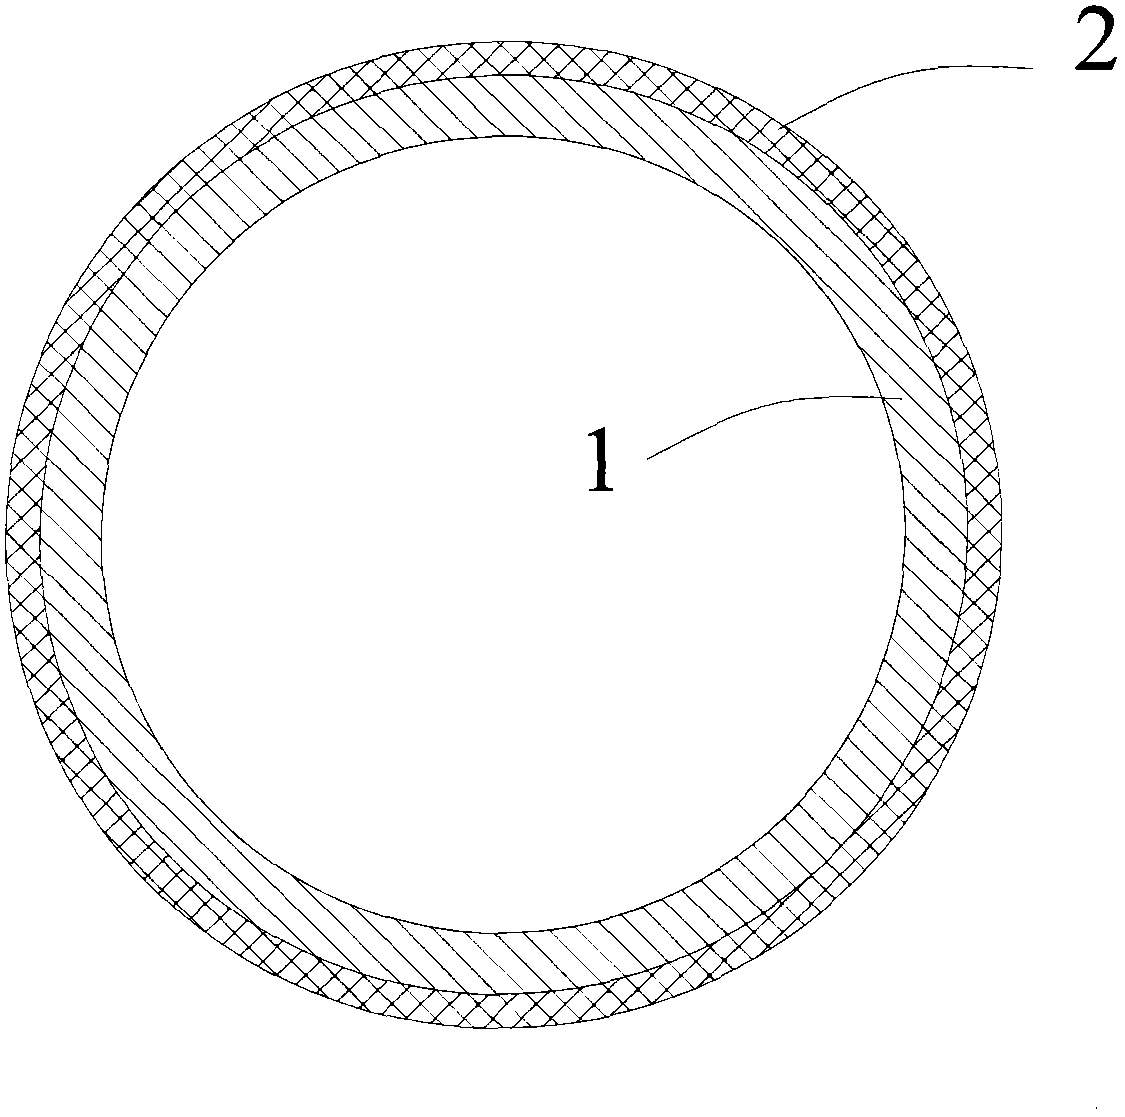 Method of forming laser cladding layer on surface of upright post of hydraulic bracket